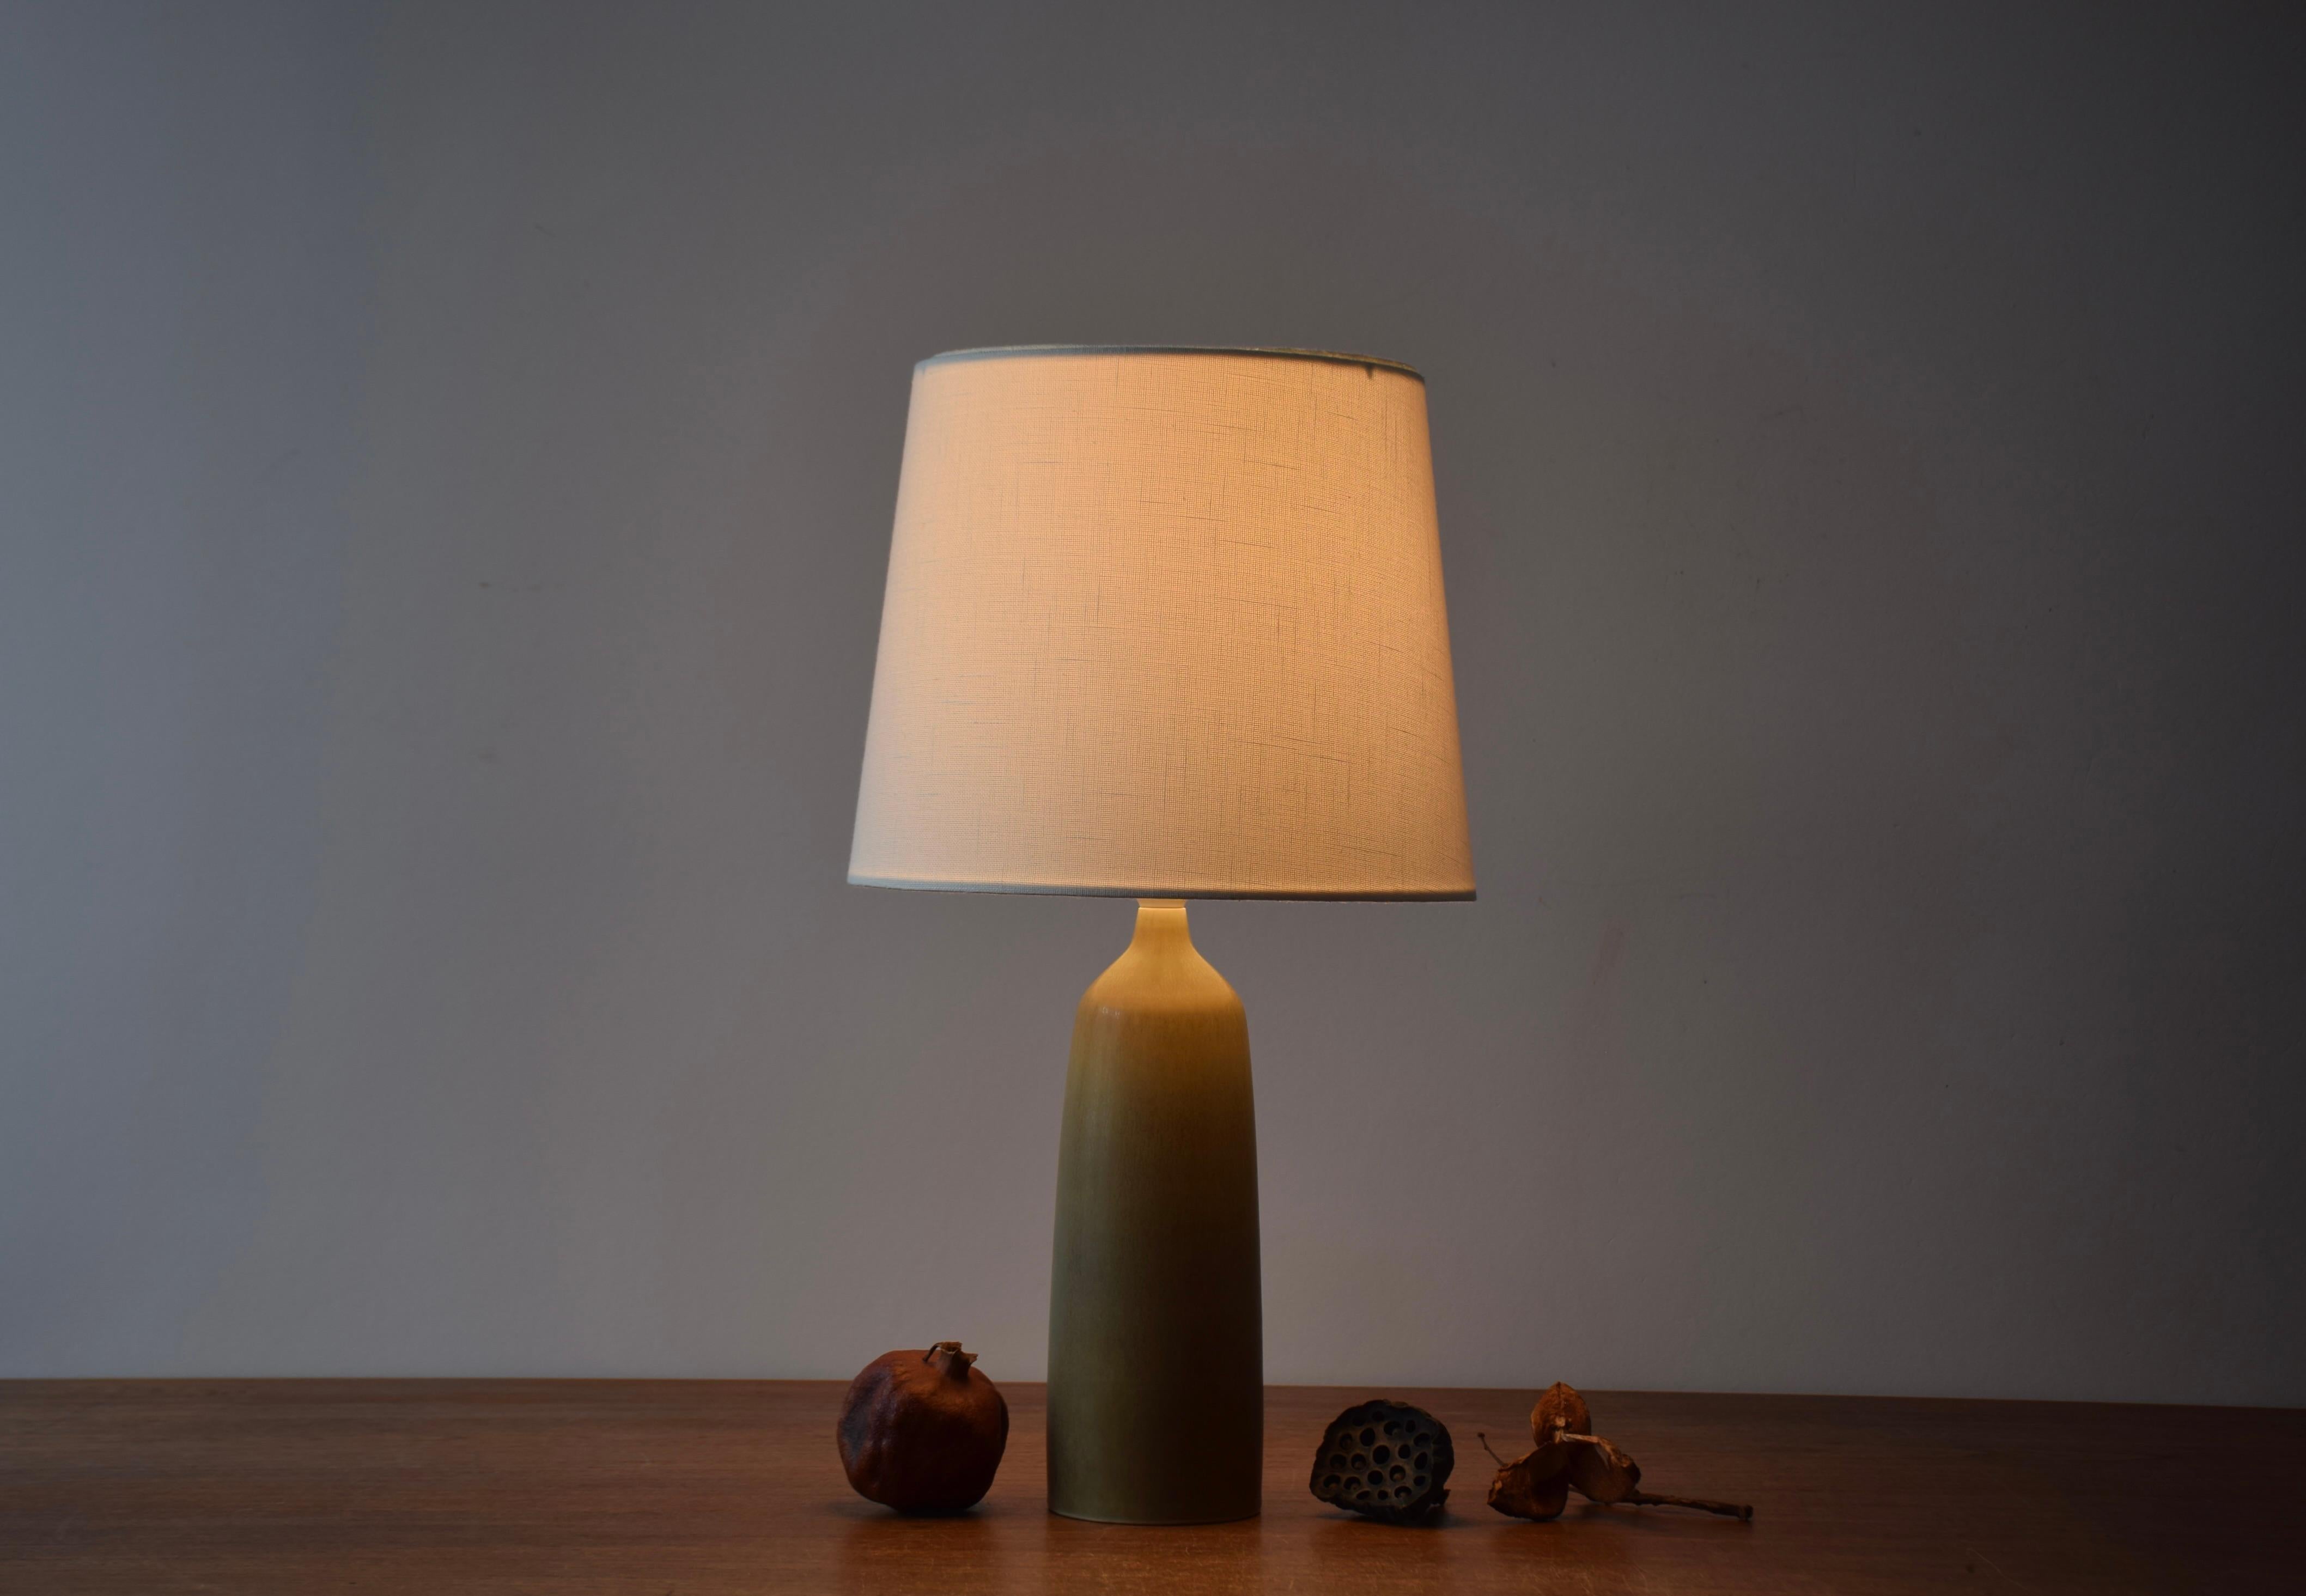 Midcentury table lamp from the Danish ceramic workshop Palshus.  
The lamp was designed by Per Linnemann-Schmidt and manufactured circa 1950s.

The lamp features a olive green haresfur glaze on an elegant shape.

Included is a new lampshade designed